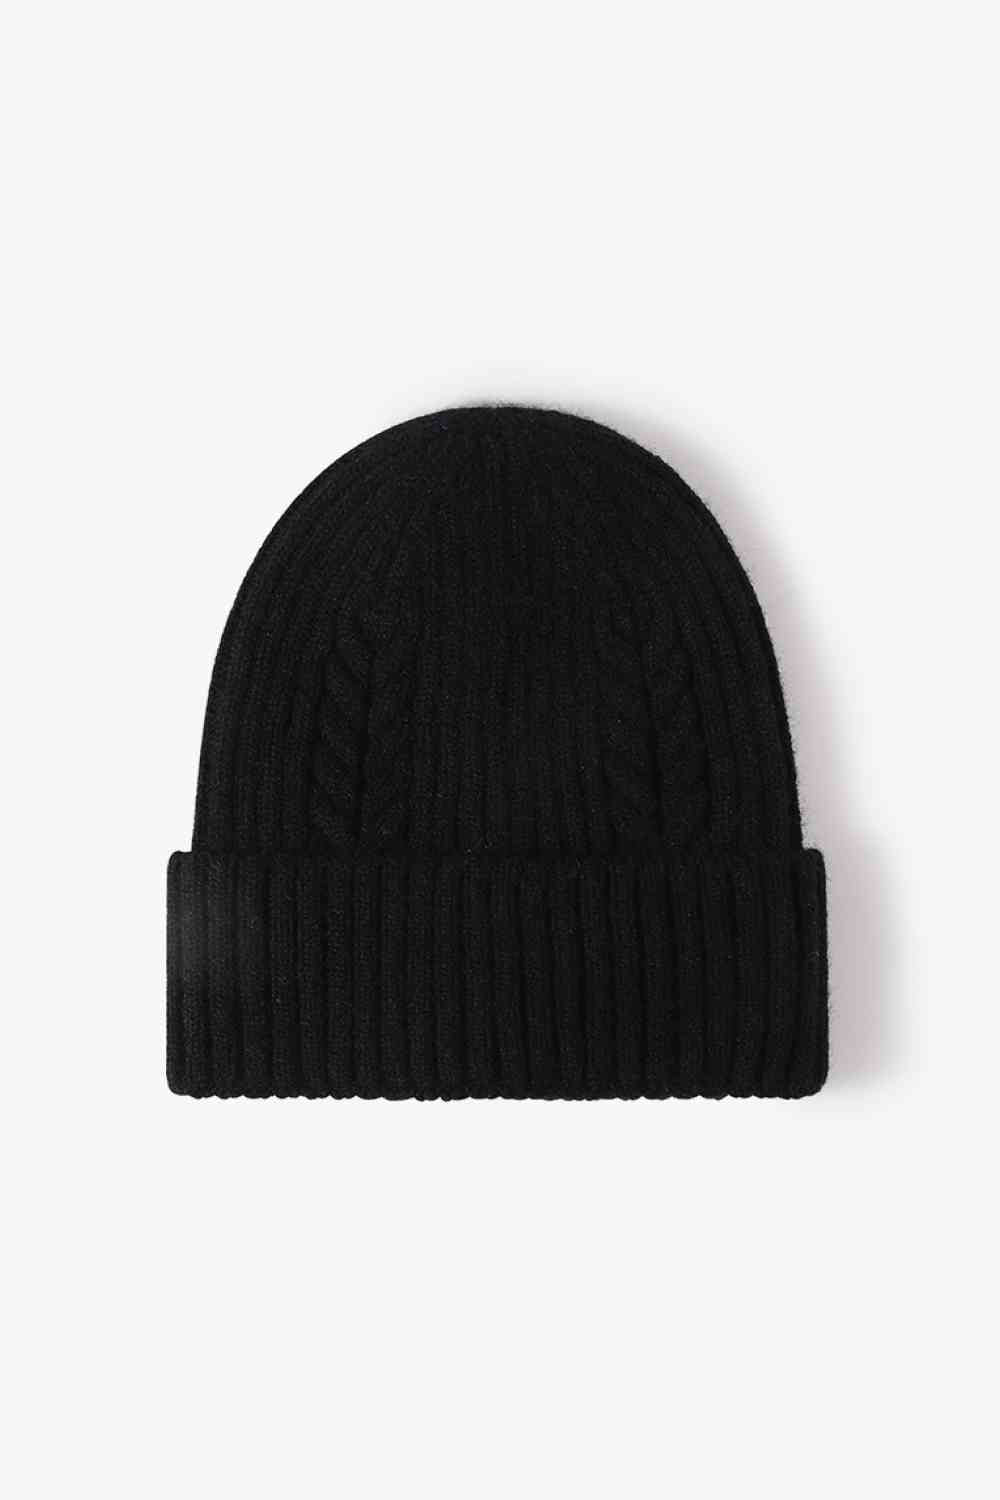 Cable-Knit Cuff Beanie Black One Size